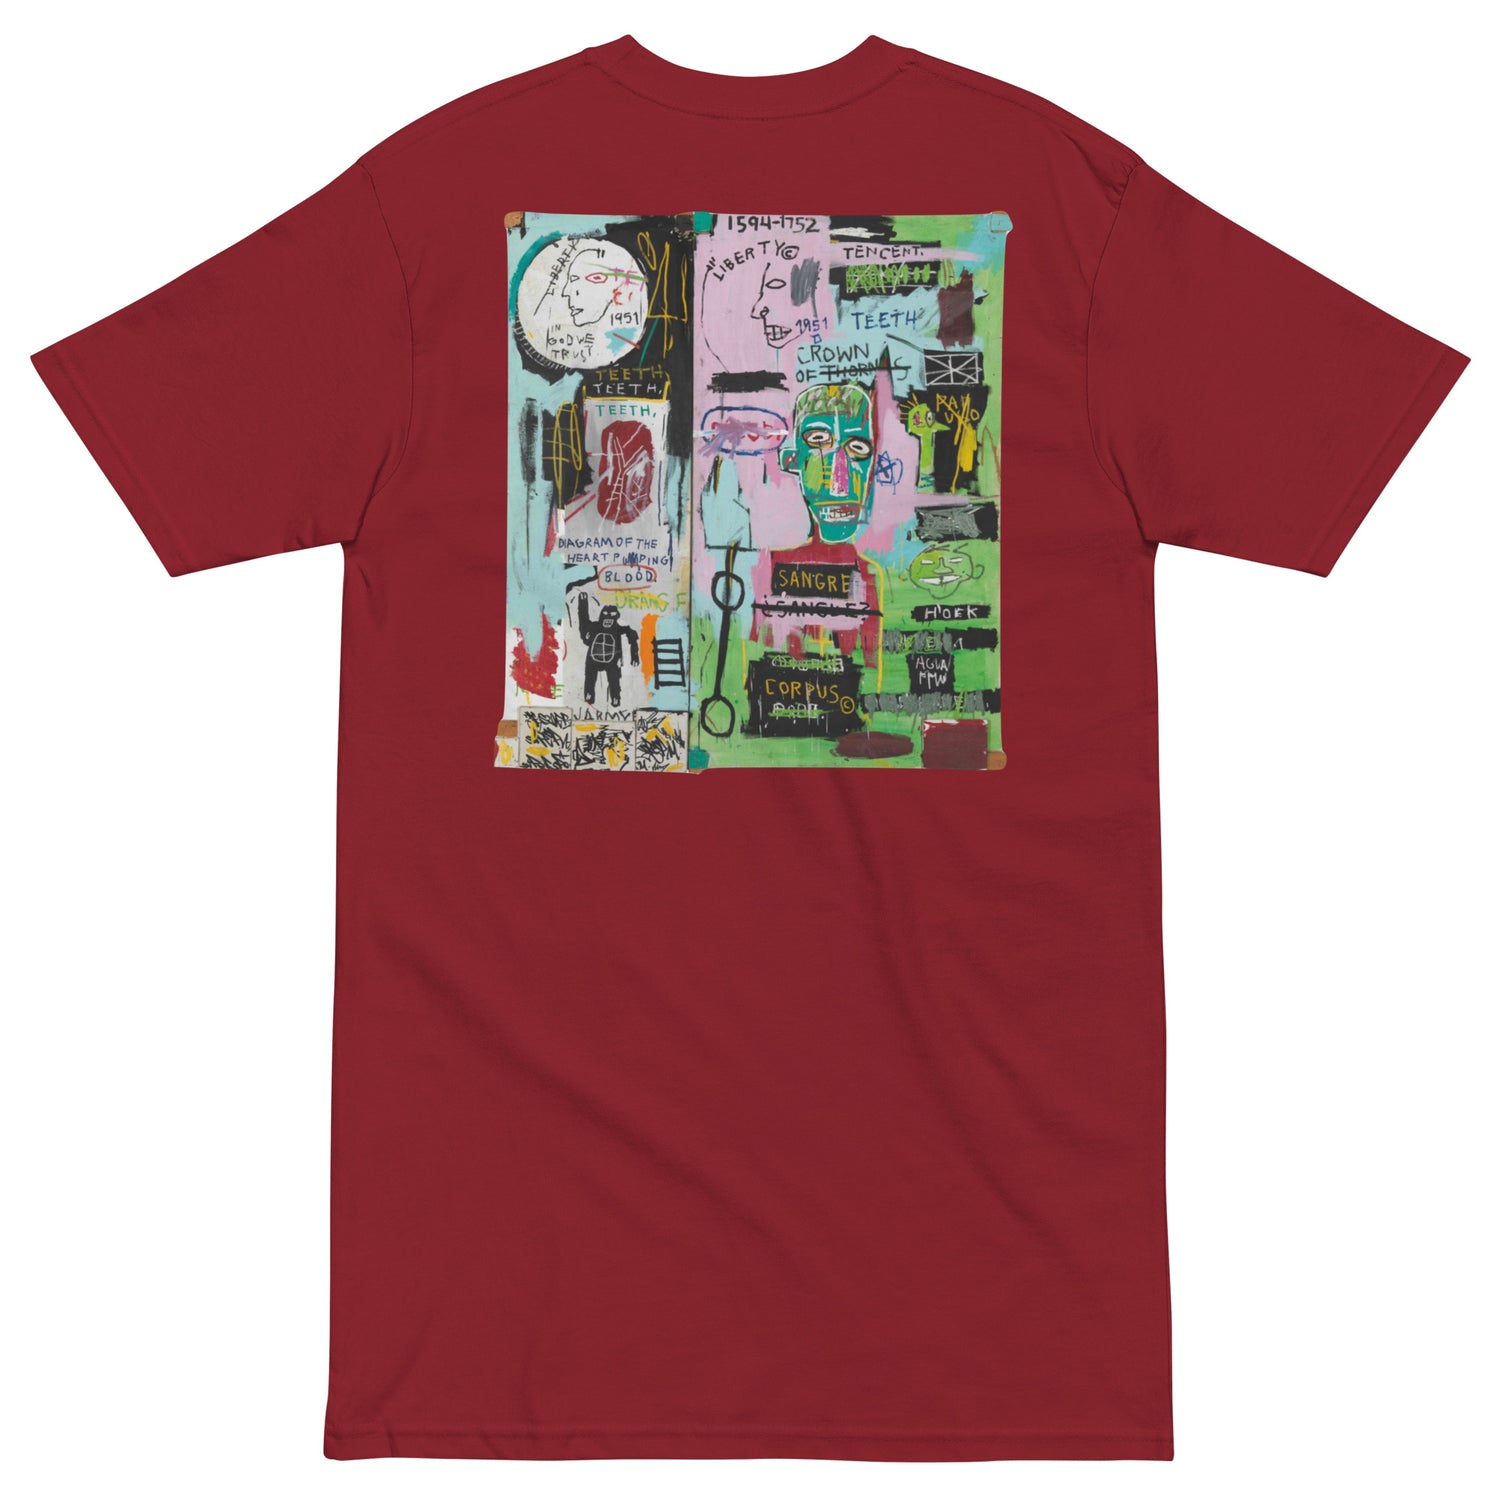 Jean-Michel Basquiat "In Italian" Artwork Embroidered and Printed Premium Streetwear T-Shirt Red